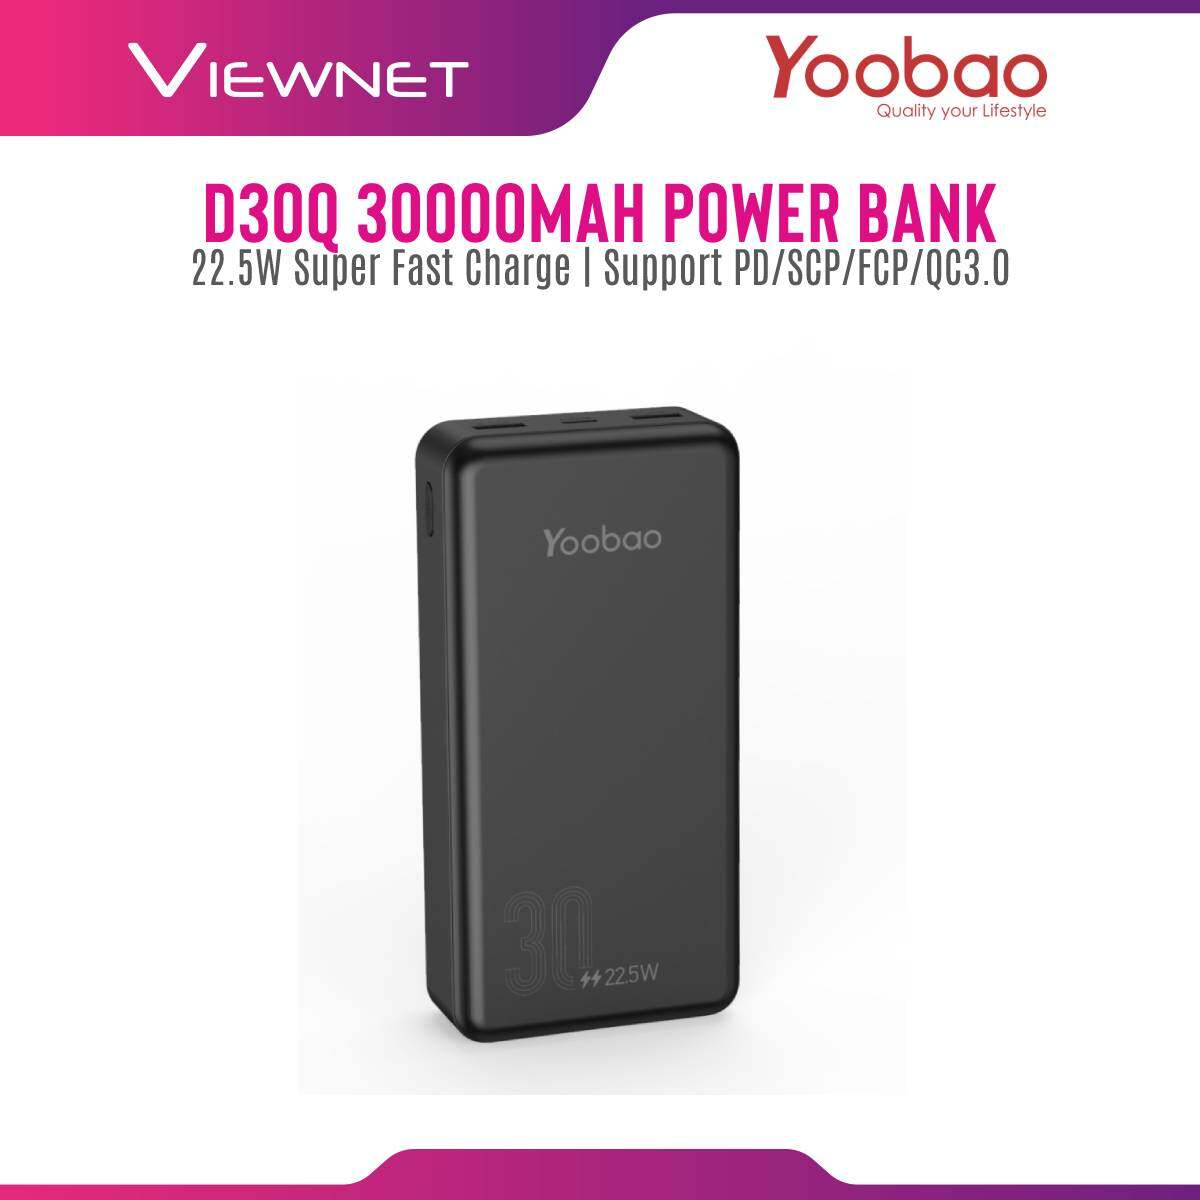 Yoobao D30Q 30000mAh 22.5W Power Bank Support Huawei Super Fast Charge /PD/FCP/QC3.0